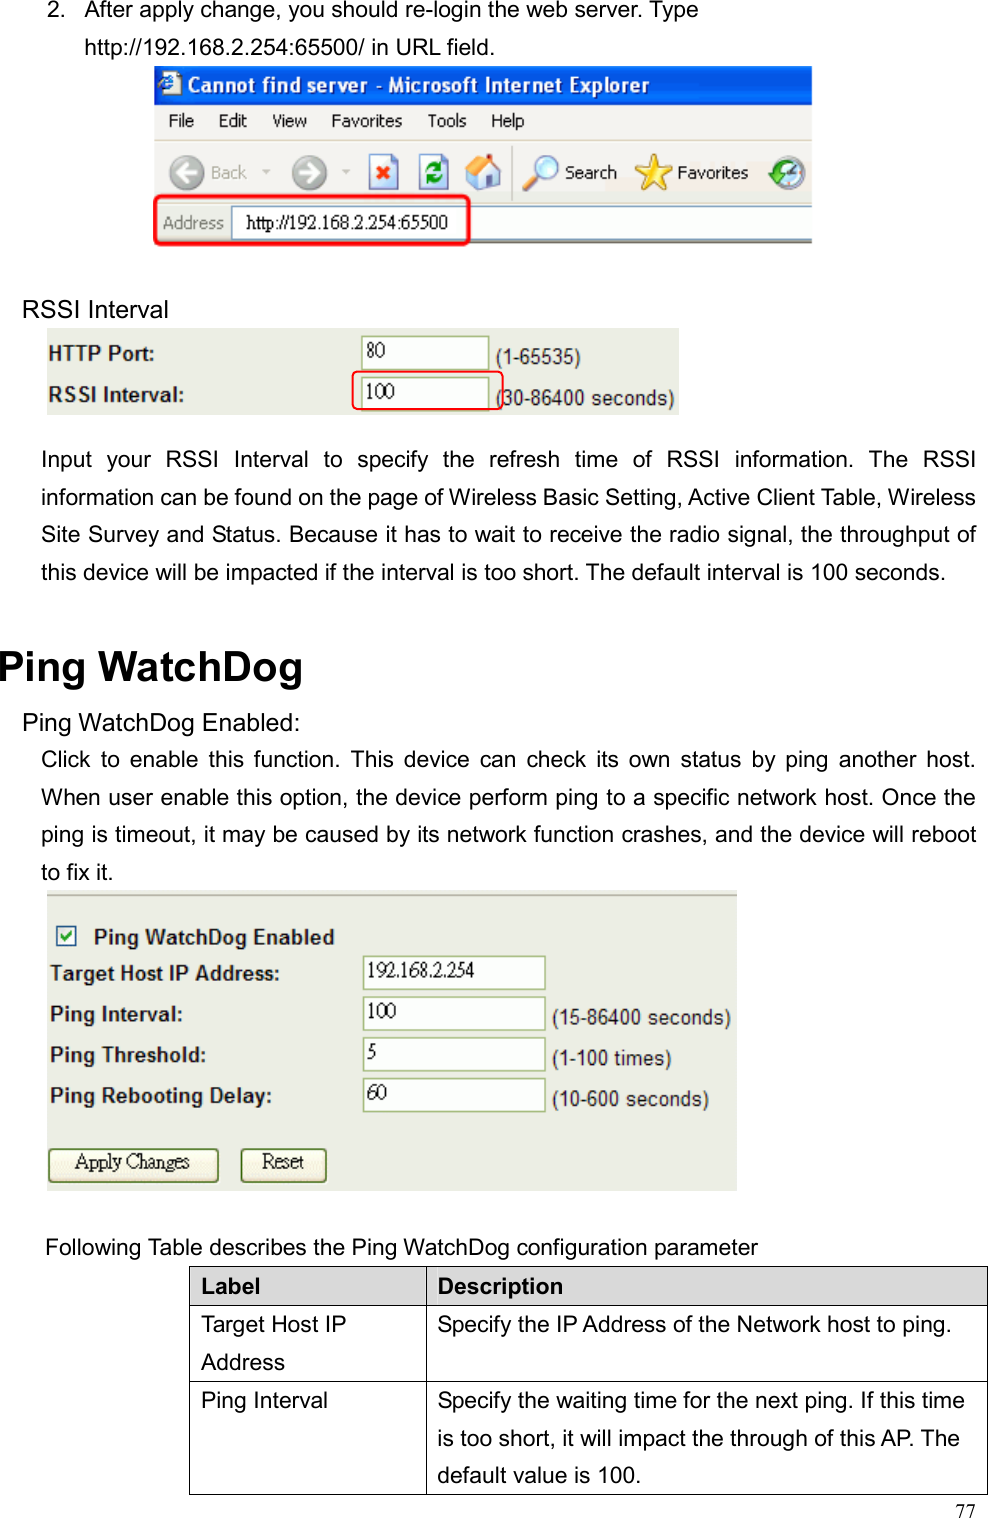  772.  After apply change, you should re-login the web server. Type http://192.168.2.254:65500/ in URL field.      RSSI Interval        Input your RSSI Interval to specify the refresh time of RSSI information. The RSSI information can be found on the page of Wireless Basic Setting, Active Client Table, Wireless Site Survey and Status. Because it has to wait to receive the radio signal, the throughput of this device will be impacted if the interval is too short. The default interval is 100 seconds.  Ping WatchDog Ping WatchDog Enabled: Click to enable this function. This device can check its own status by ping another host. When user enable this option, the device perform ping to a specific network host. Once the ping is timeout, it may be caused by its network function crashes, and the device will reboot to fix it.   Following Table describes the Ping WatchDog configuration parameter Label  Description Target Host IP Address Specify the IP Address of the Network host to ping. Ping Interval  Specify the waiting time for the next ping. If this time is too short, it will impact the through of this AP. The default value is 100. 